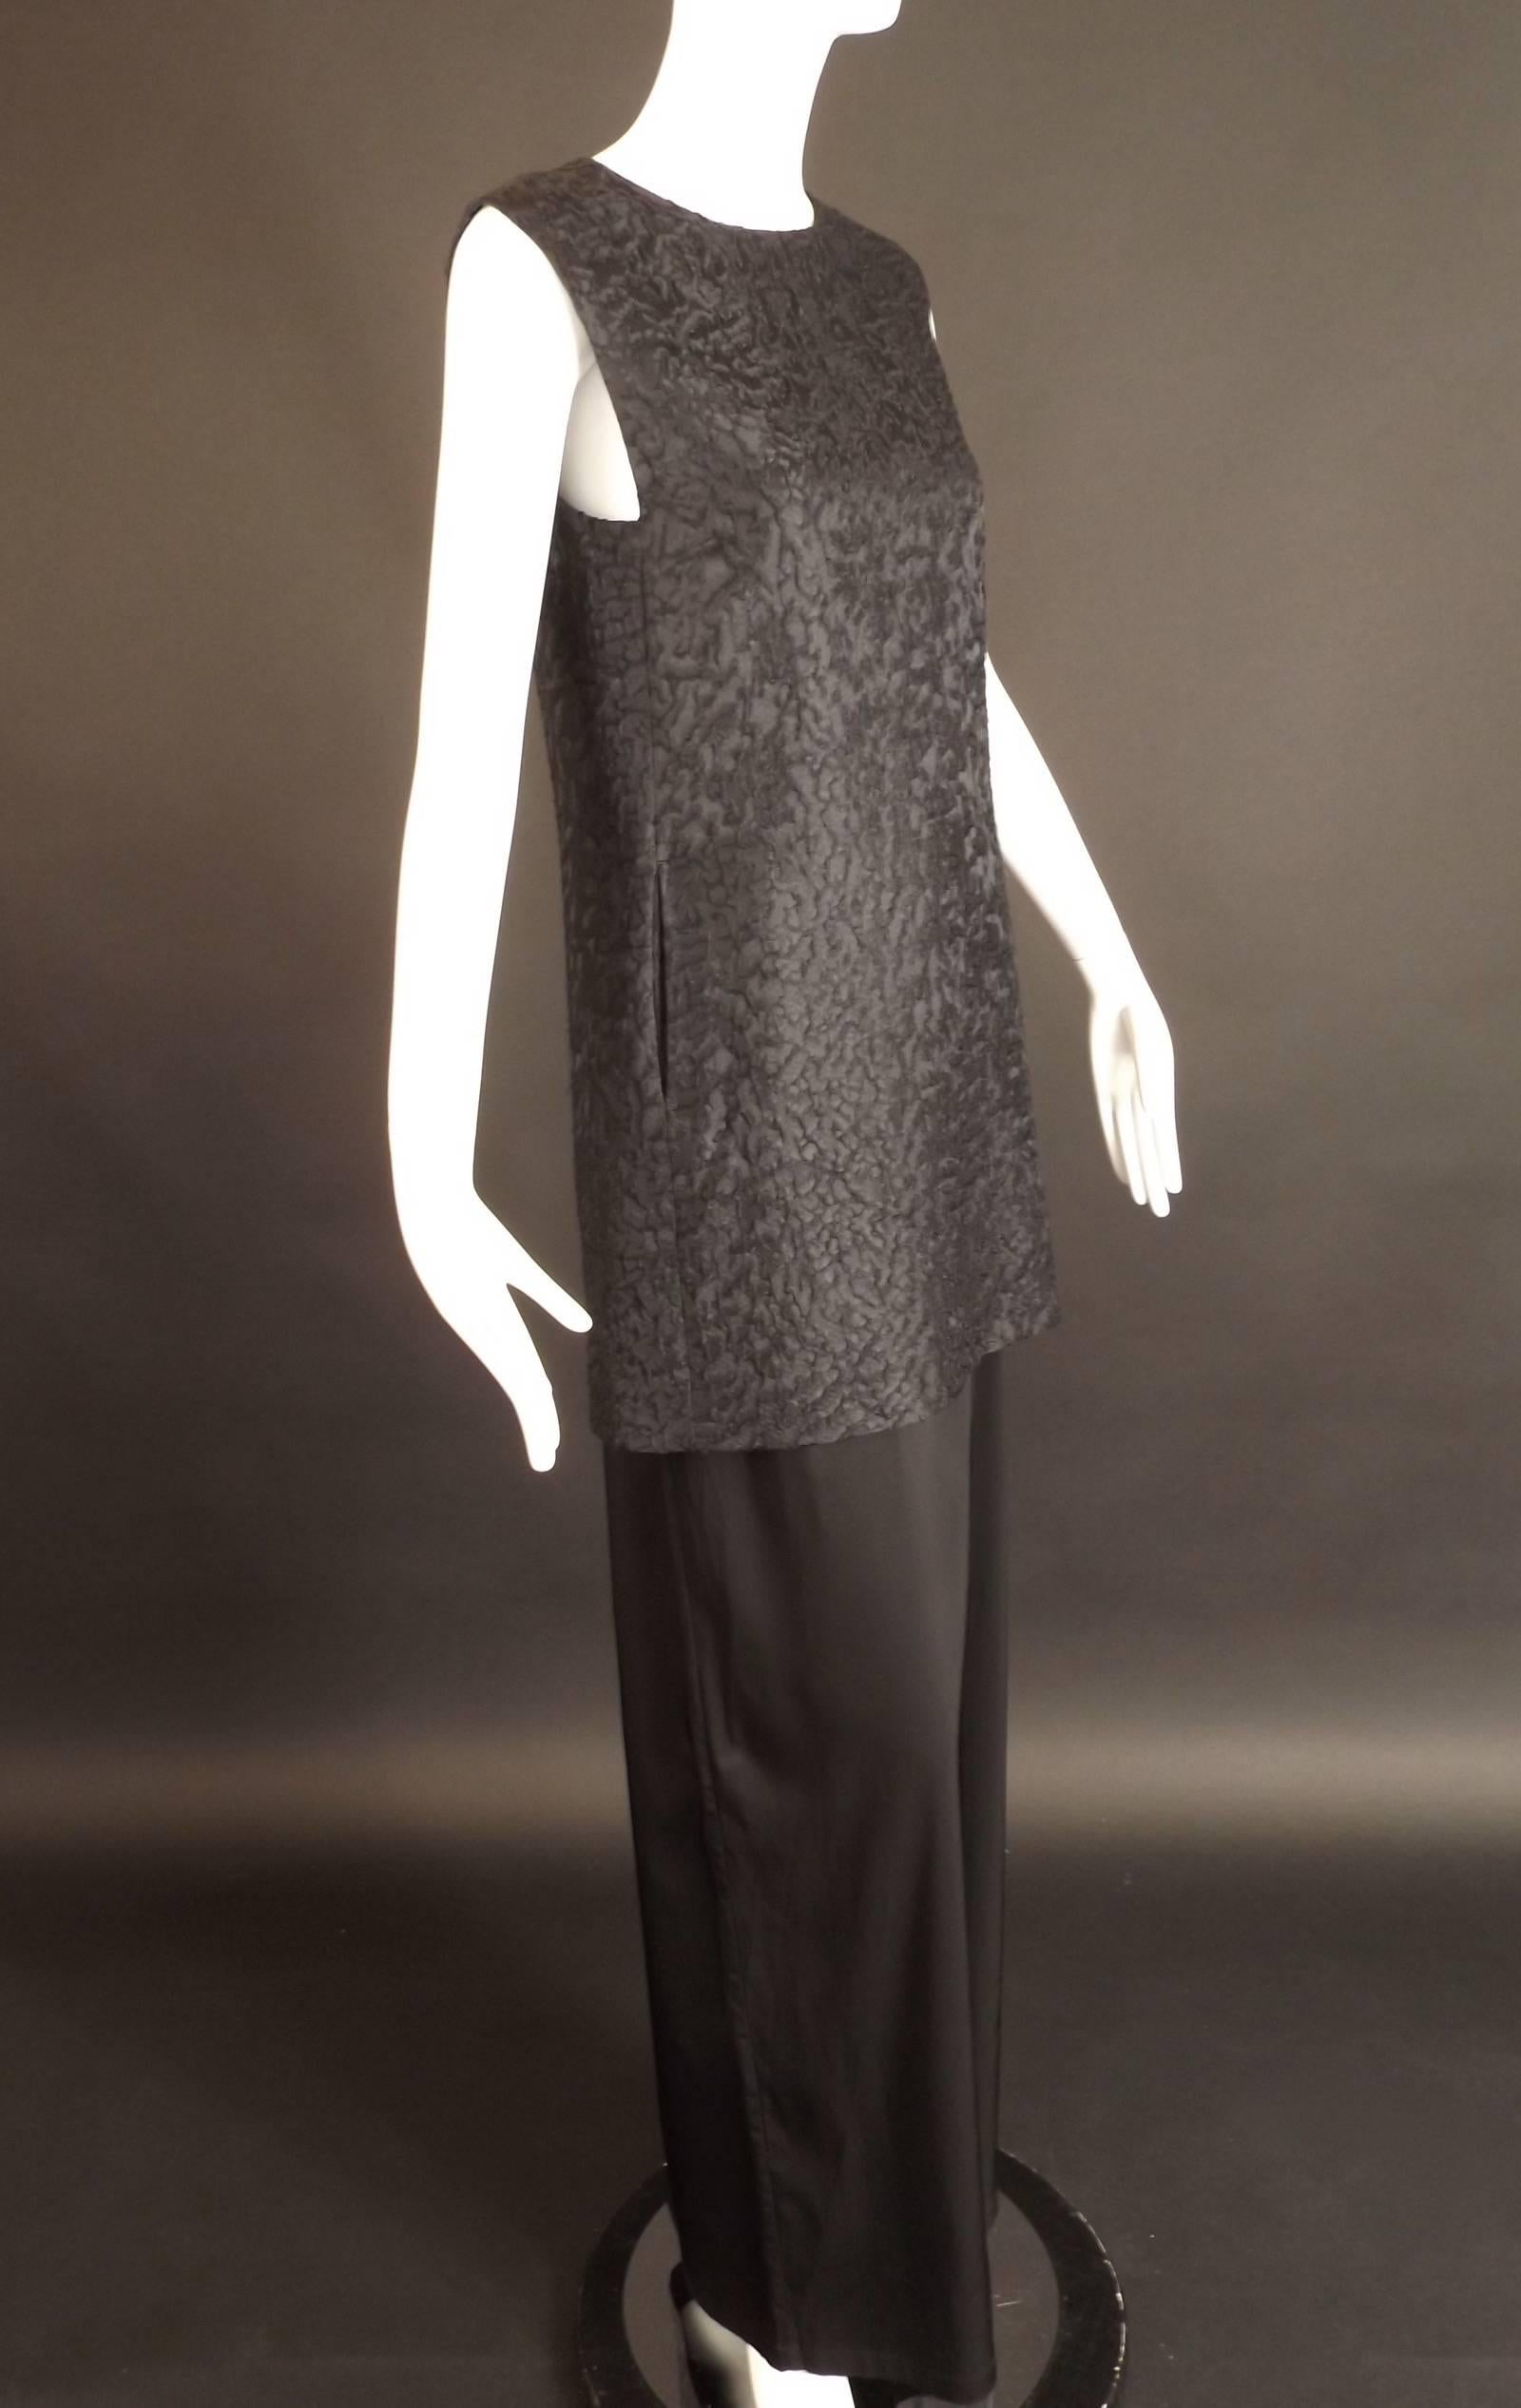 Wonderful Edwardian style evening gown in a black satin brocade and a stretch satin knit. The dress has a tunic upper in the brocade  that has diagonal darts at the bust and a slight a-line shape over the hips. The skirt is attached to a built in